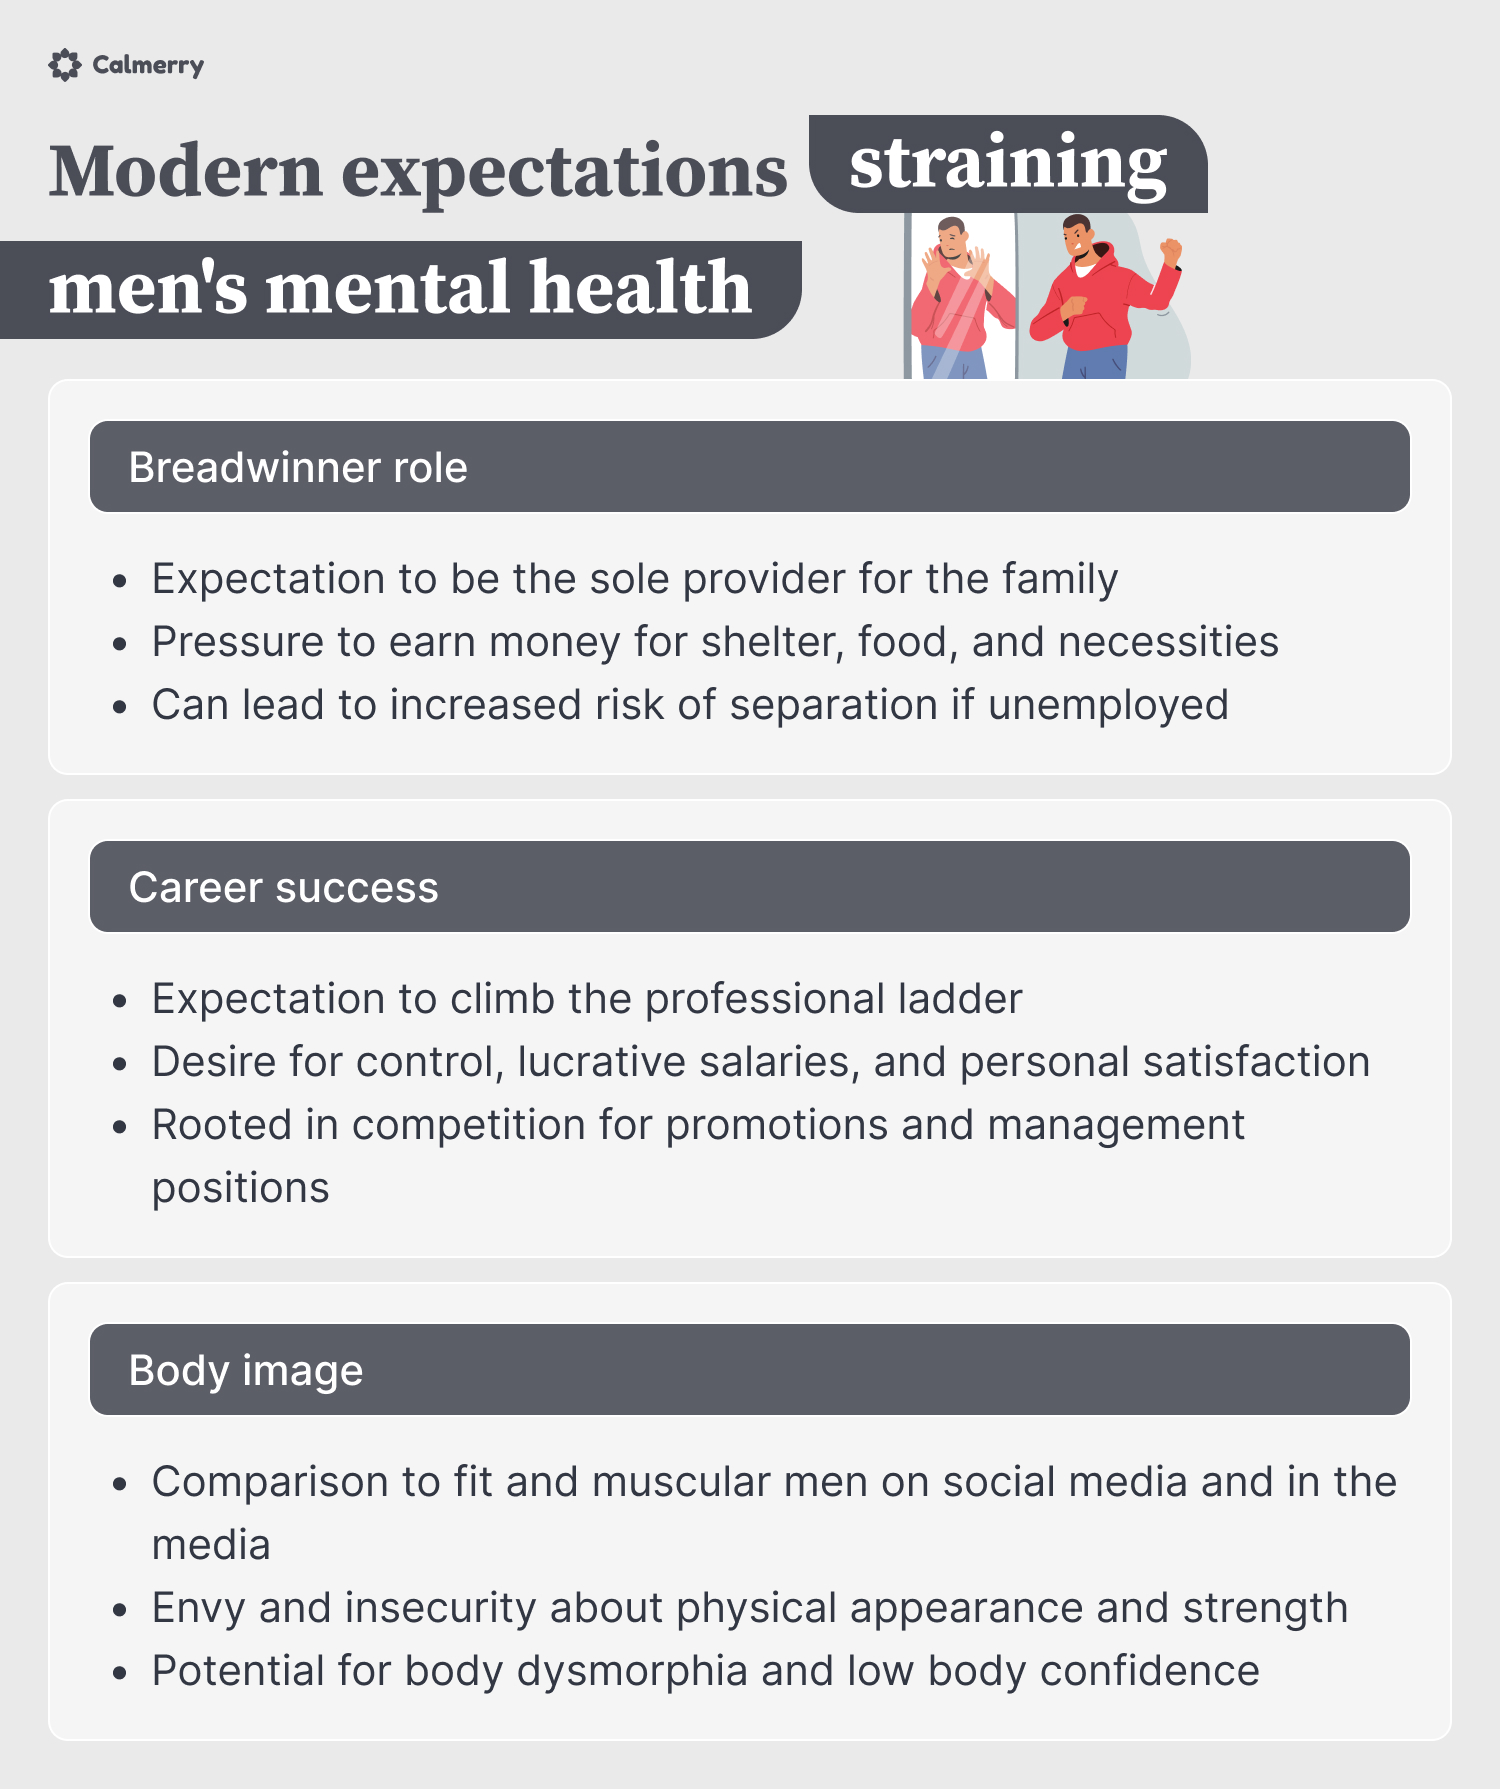 Infographic titled 'Modern expectations straining men's mental health' with Calmerry branding. It highlights three key areas: 'Breadwinner role' with points on the expectation to be the sole provider, pressure to earn money for essentials, and risk of separation if unemployed; 'Career success' with points on the expectation to climb the professional ladder, desire for control, lucrative salaries, and competition for promotions; and 'Body image' with points on comparison to fit and muscular men on social media, envy and insecurity about physical appearance, and potential for body dysmorphia and low body confidence.